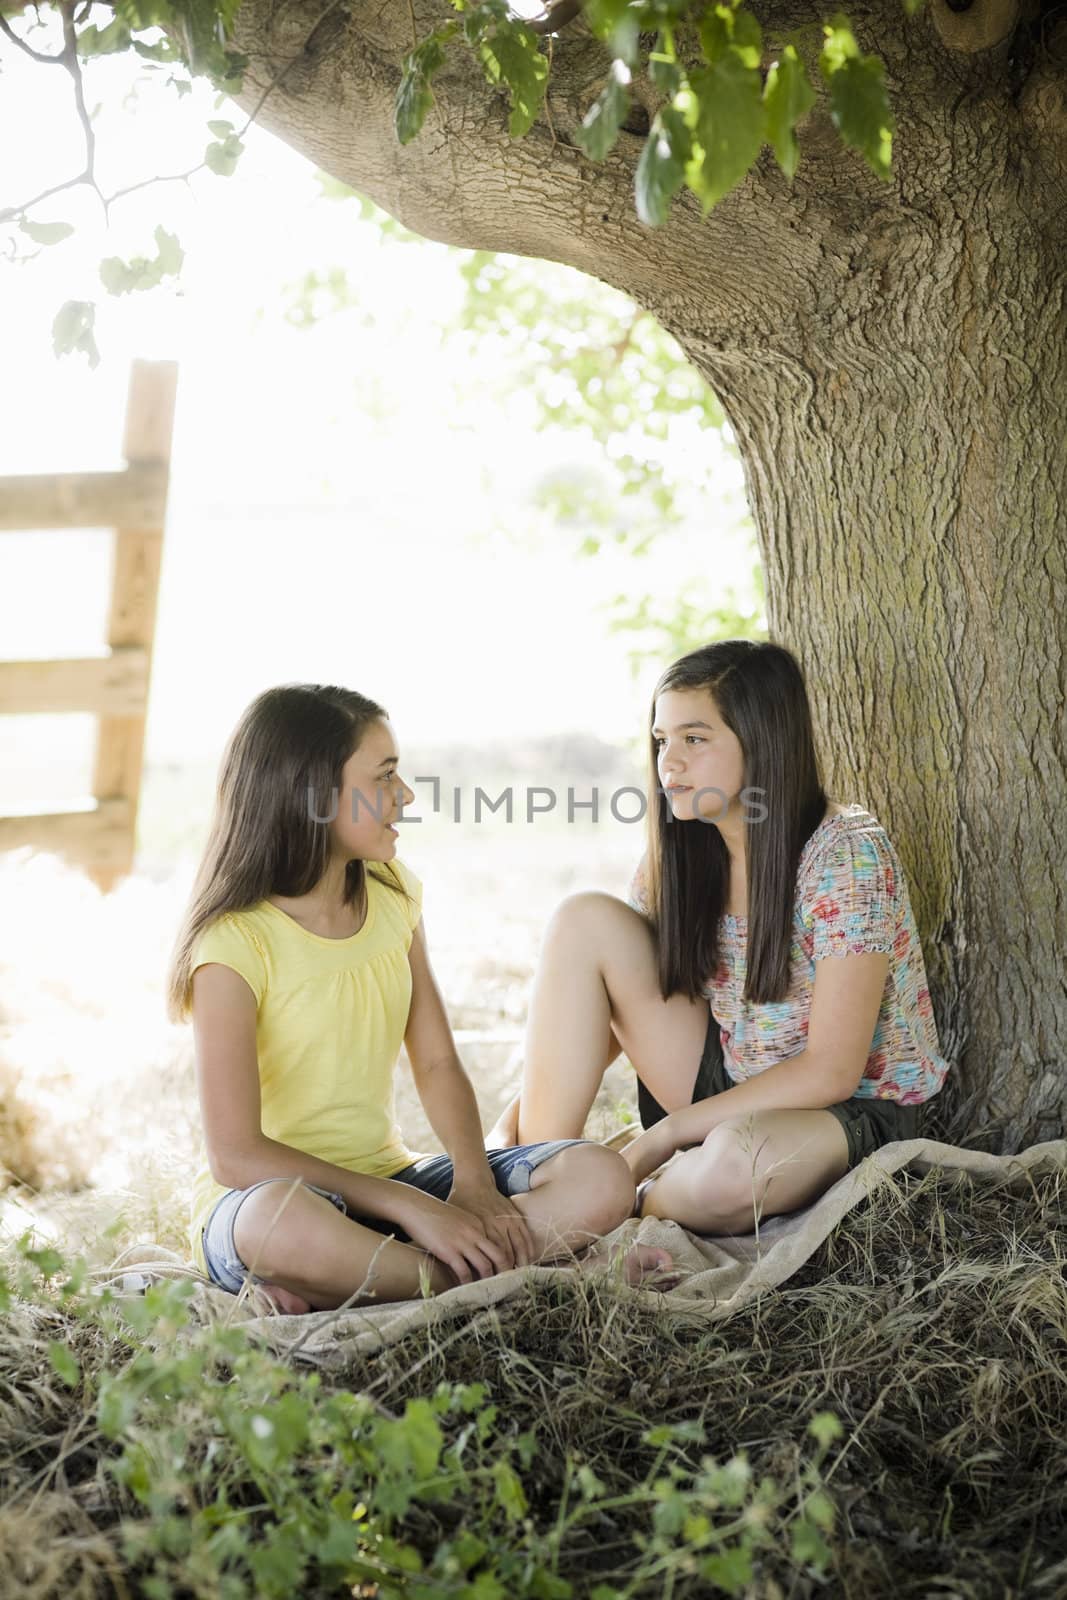 Two Girls Sitting on Blanket Under a Tree